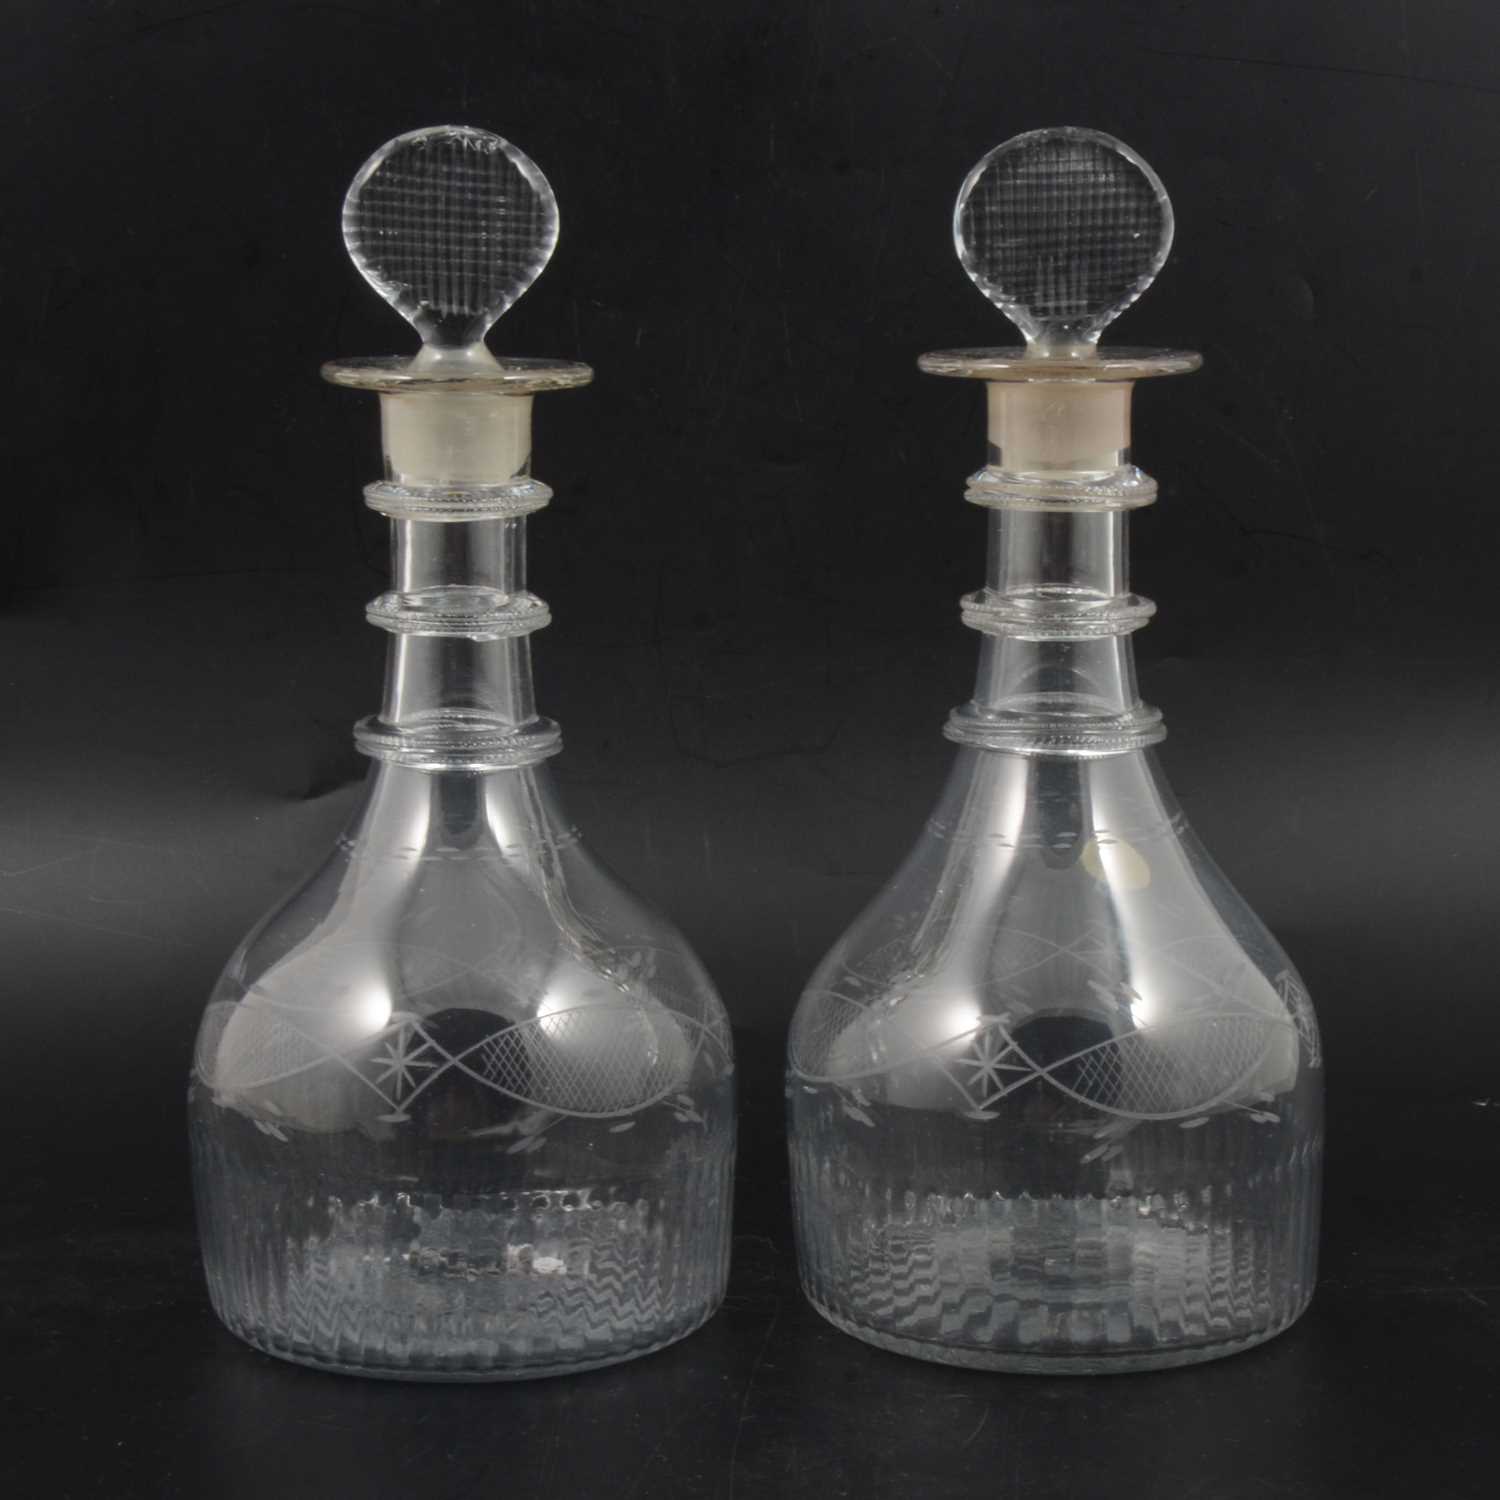 Lot 3 - A pair of Irish Cork Glass Co. decanters 